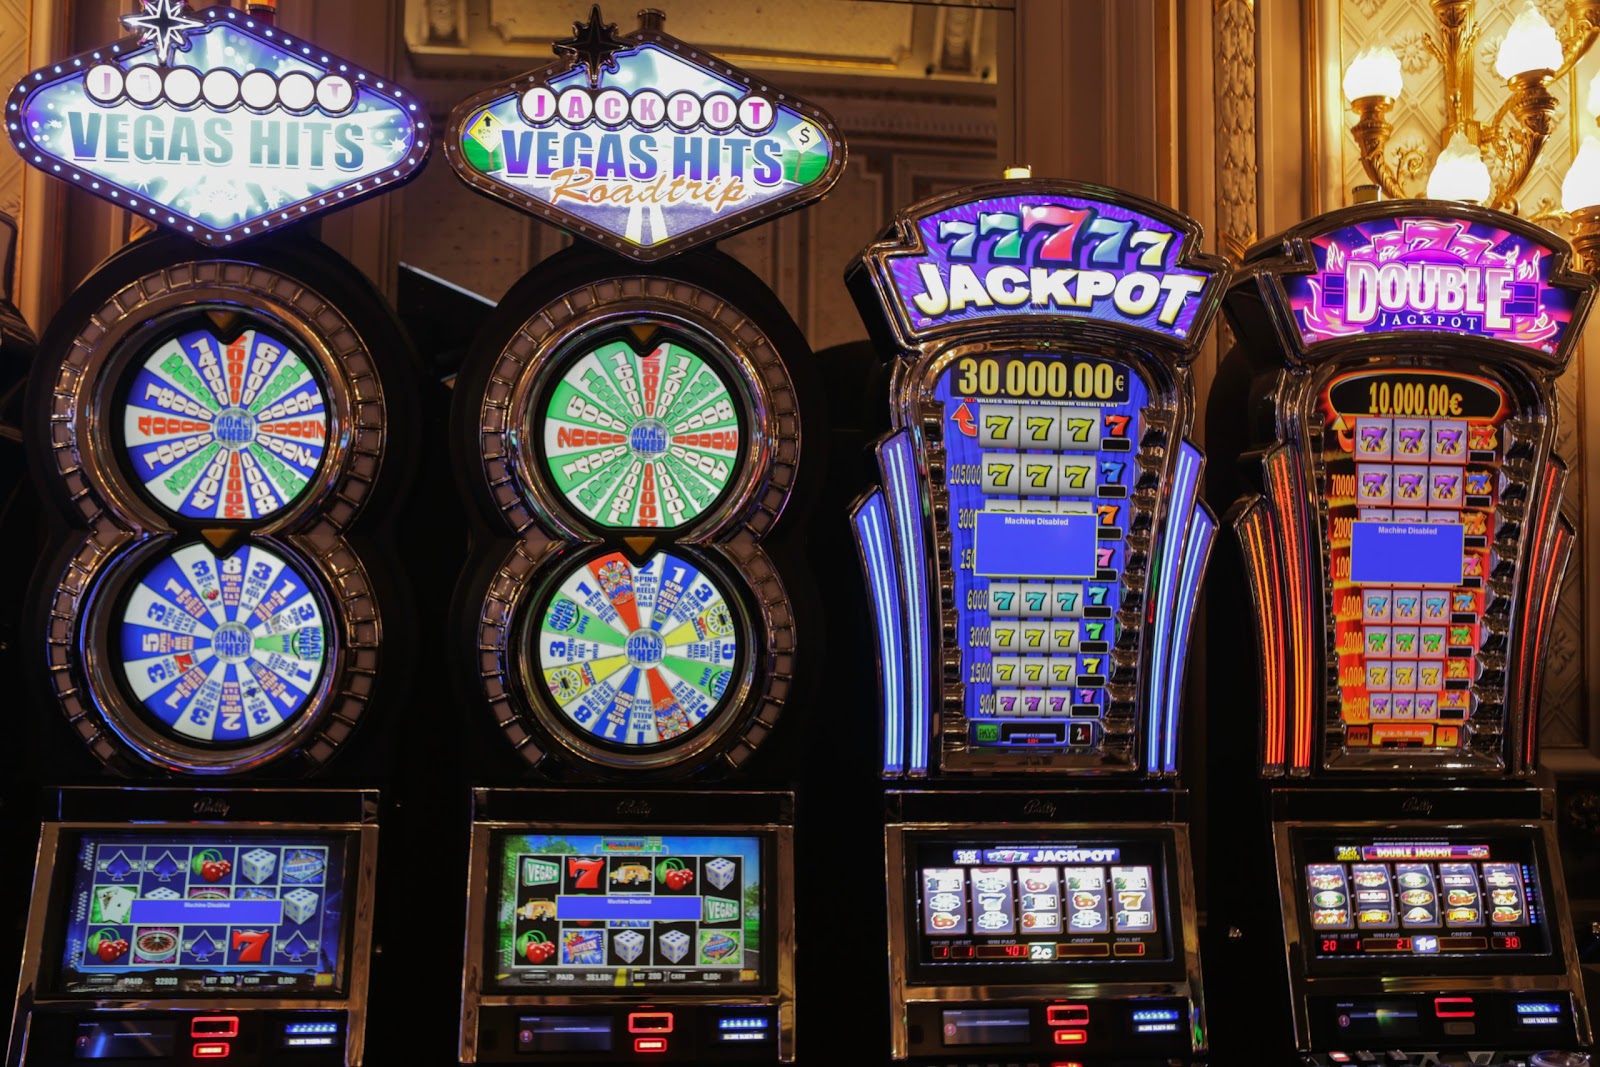 Tips to Gamble for Pure Enjoyment